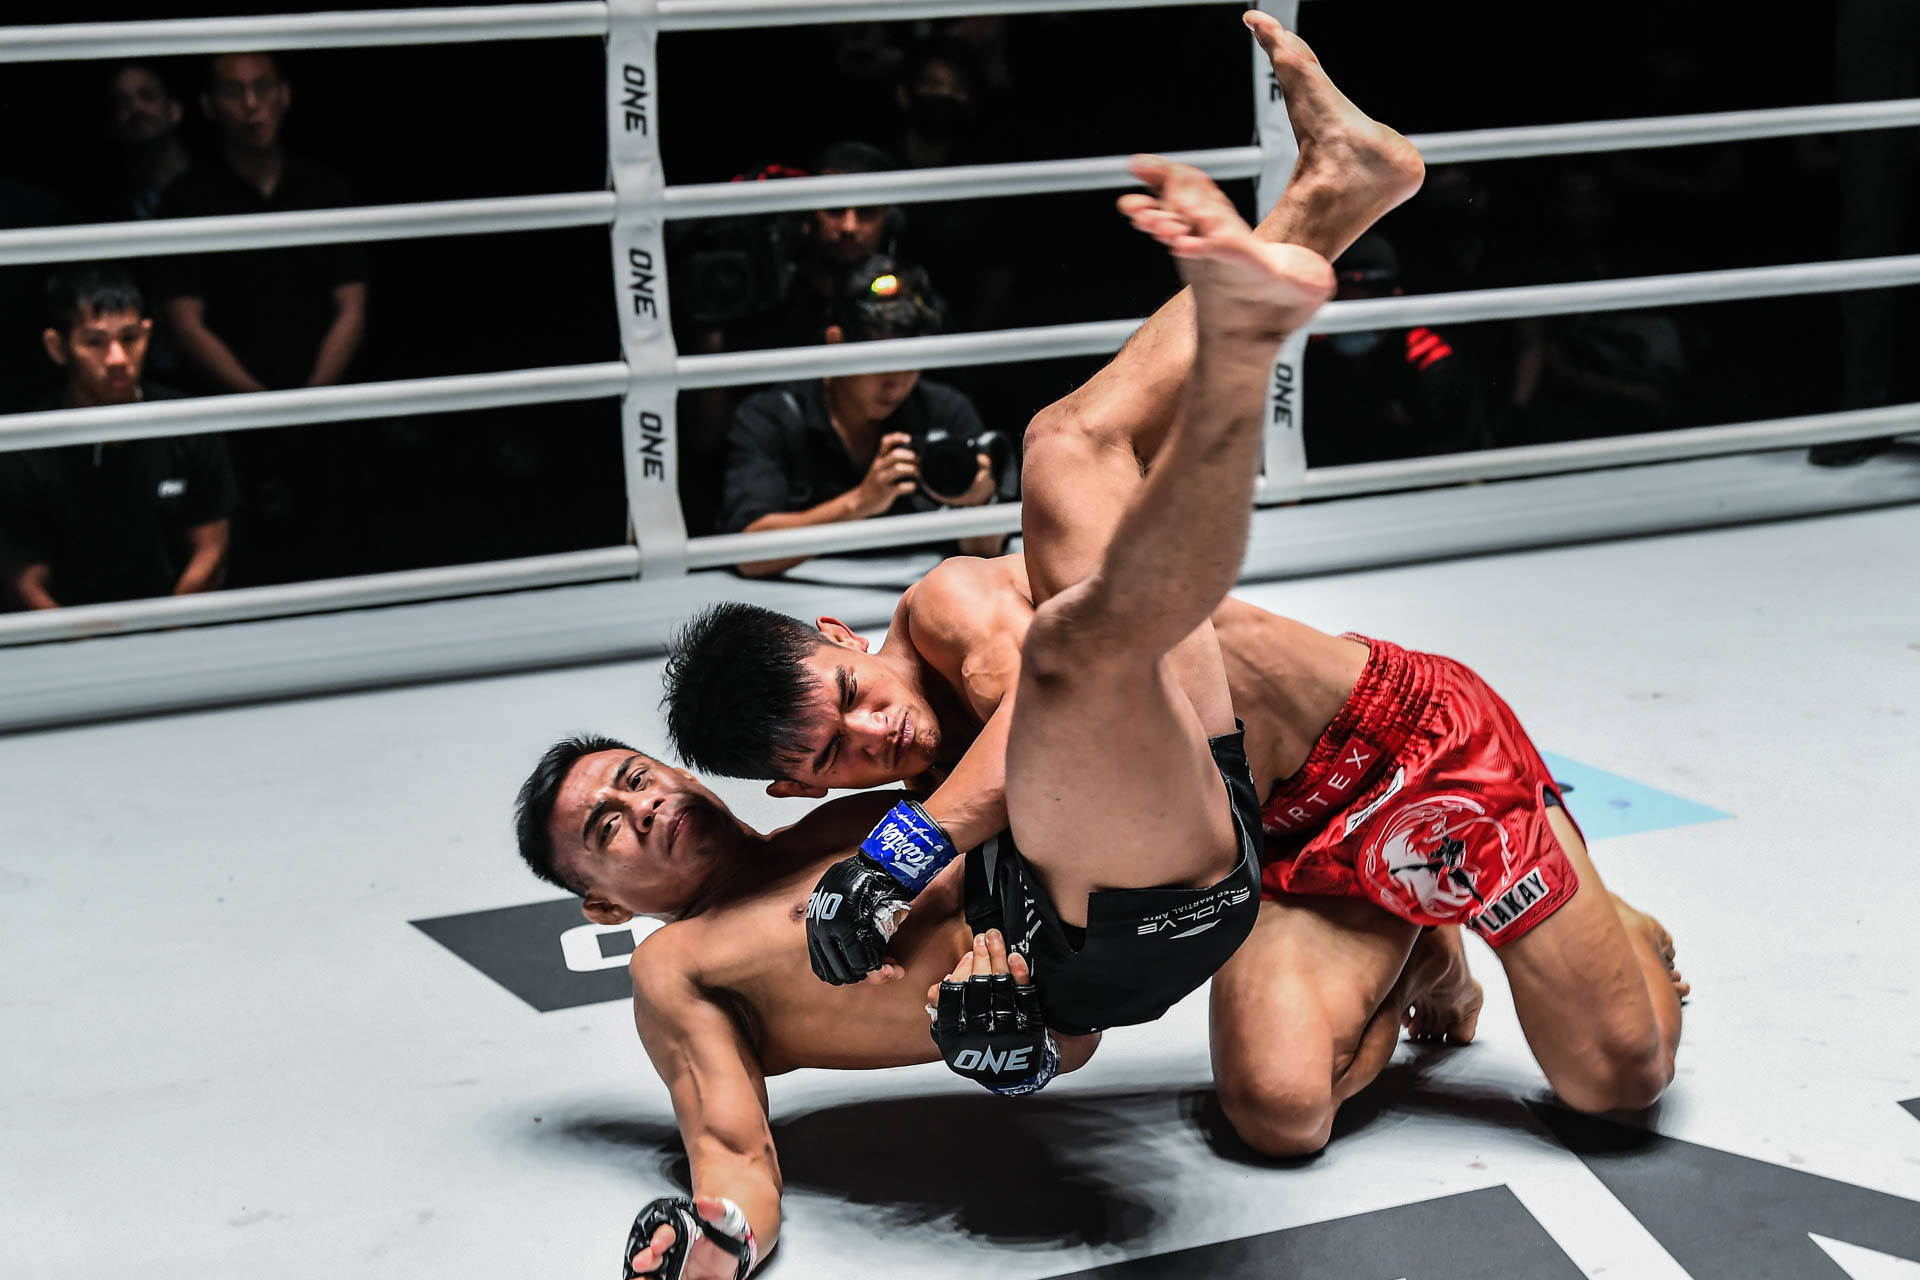 ONE-Fight-Night-7-Danny-Kingad-vs-Eko-Siputra-2 Mark Sangiao believes he can rebuild Team Lakay after exodus Mixed Martial Arts News ONE Championship  - philippine sports news